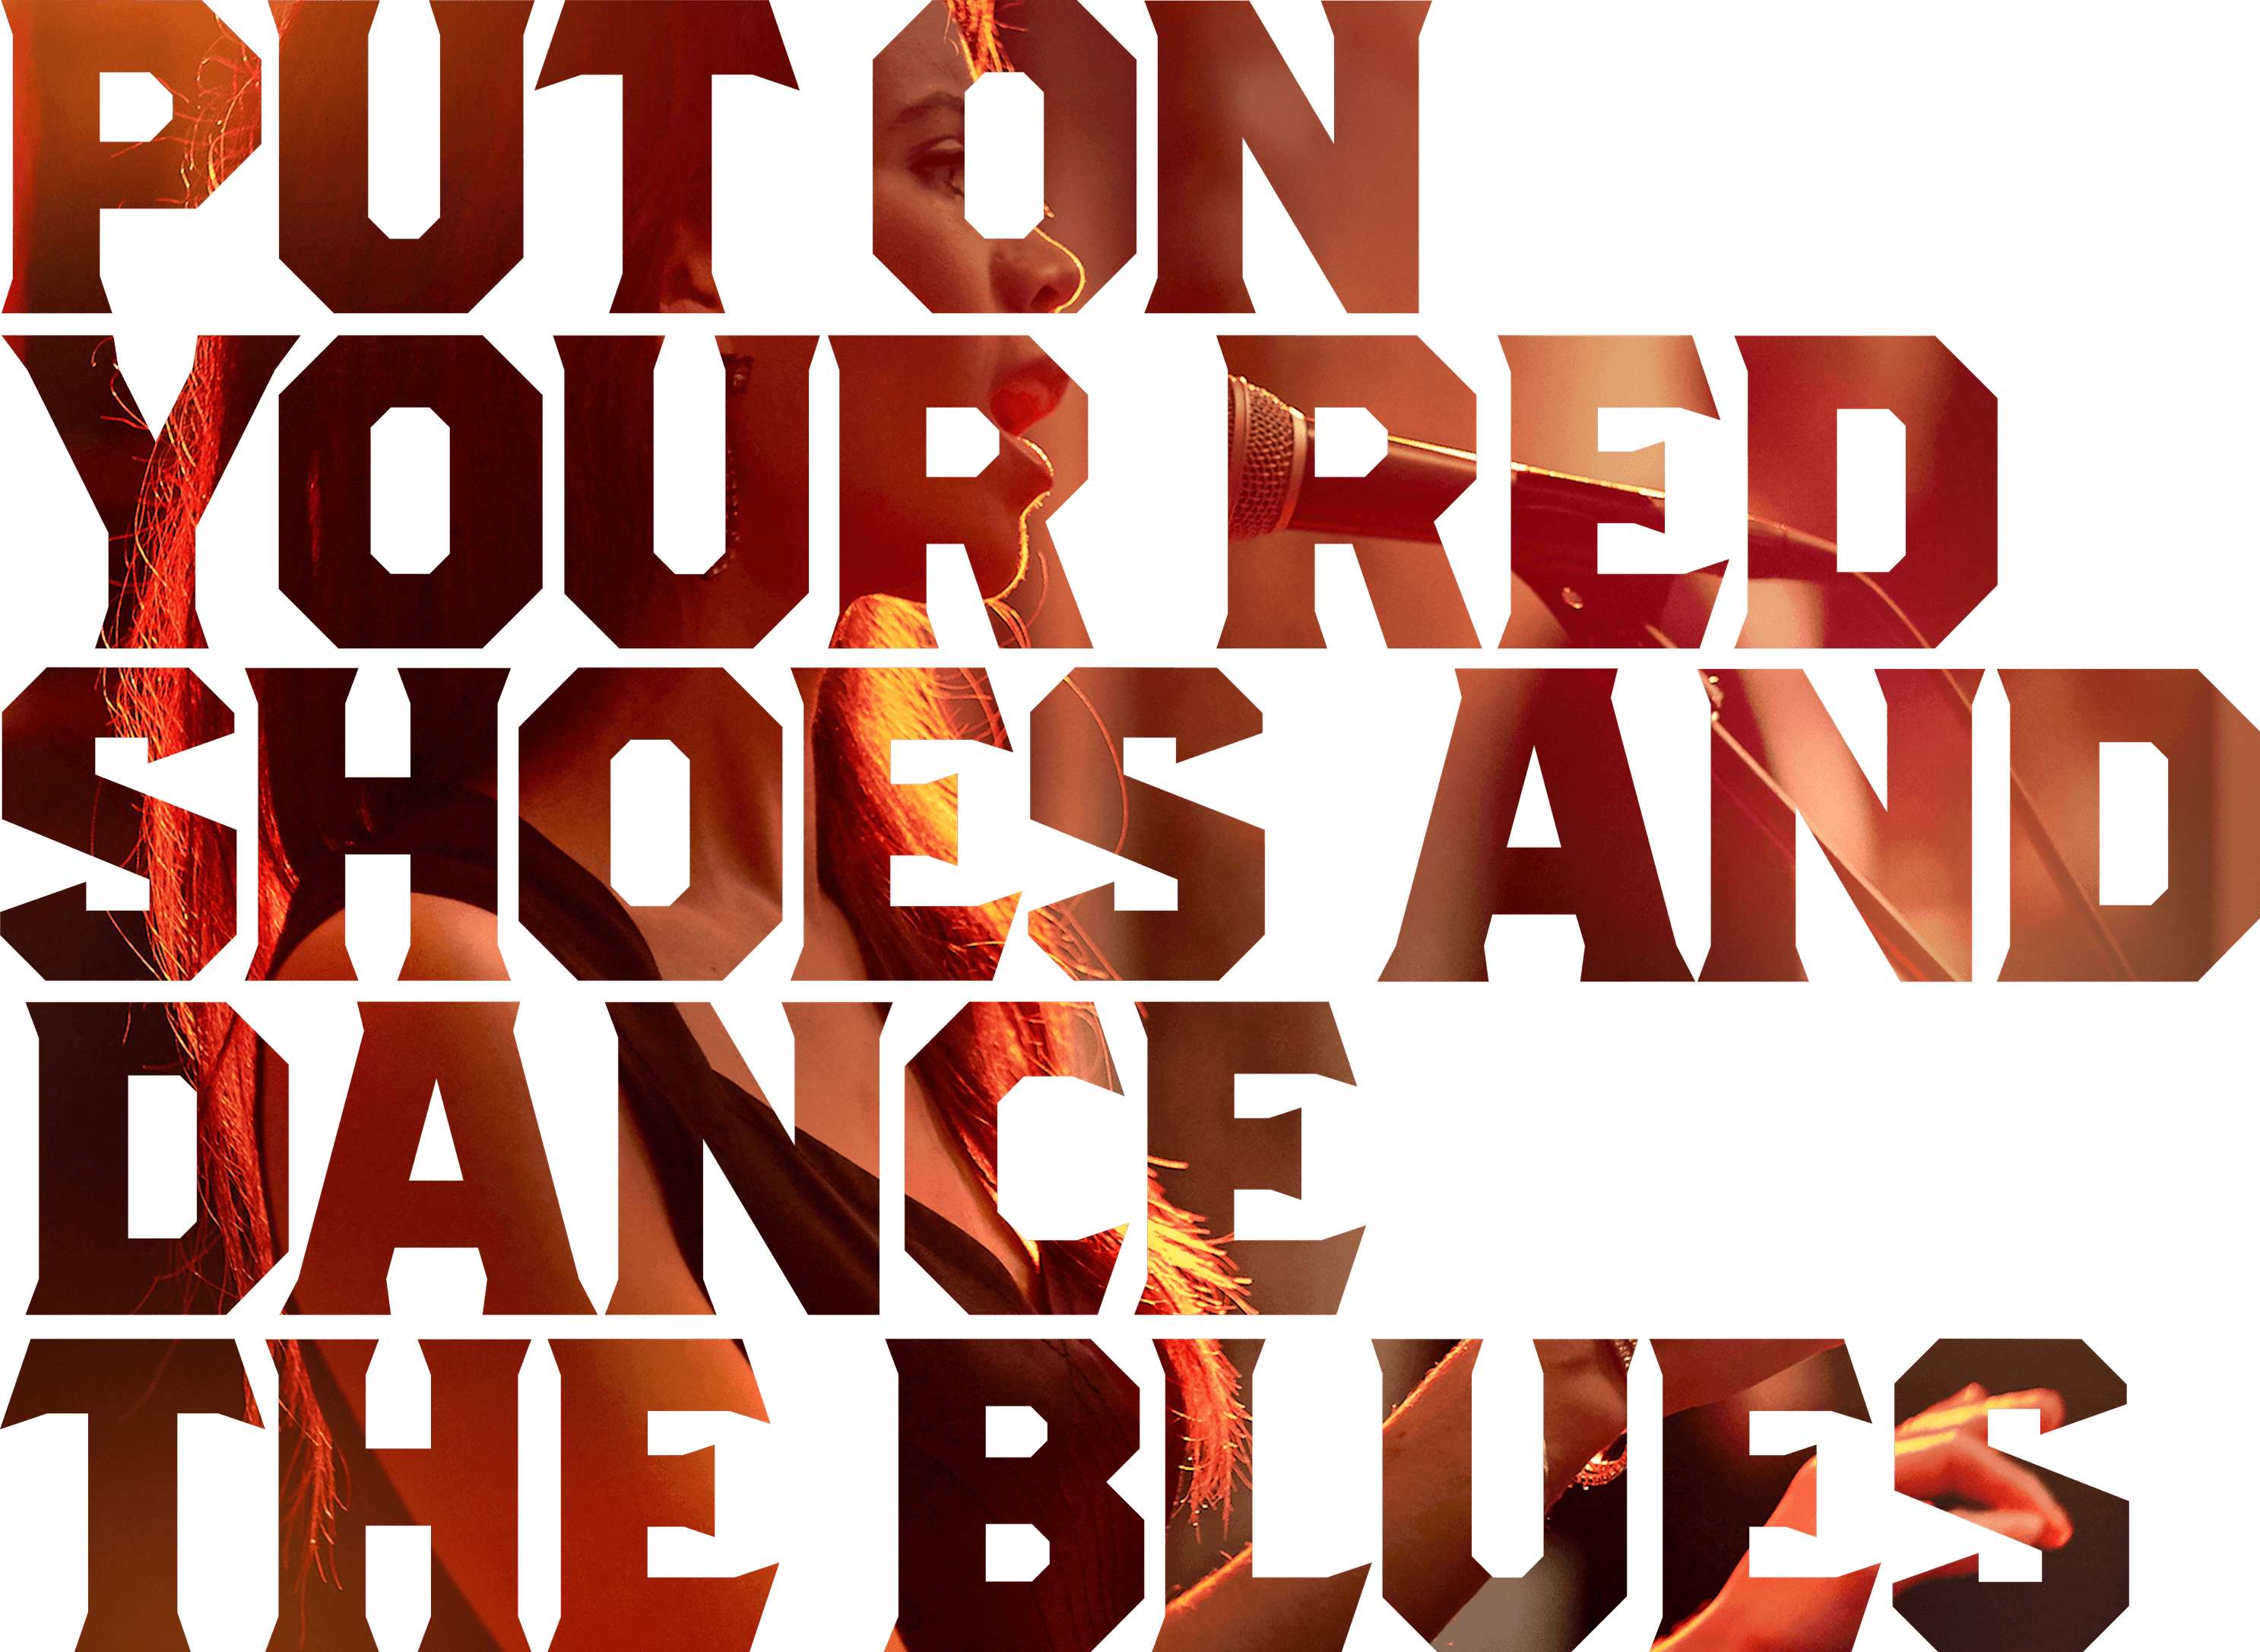 Put On Your Red Shoes And Dance The Blues